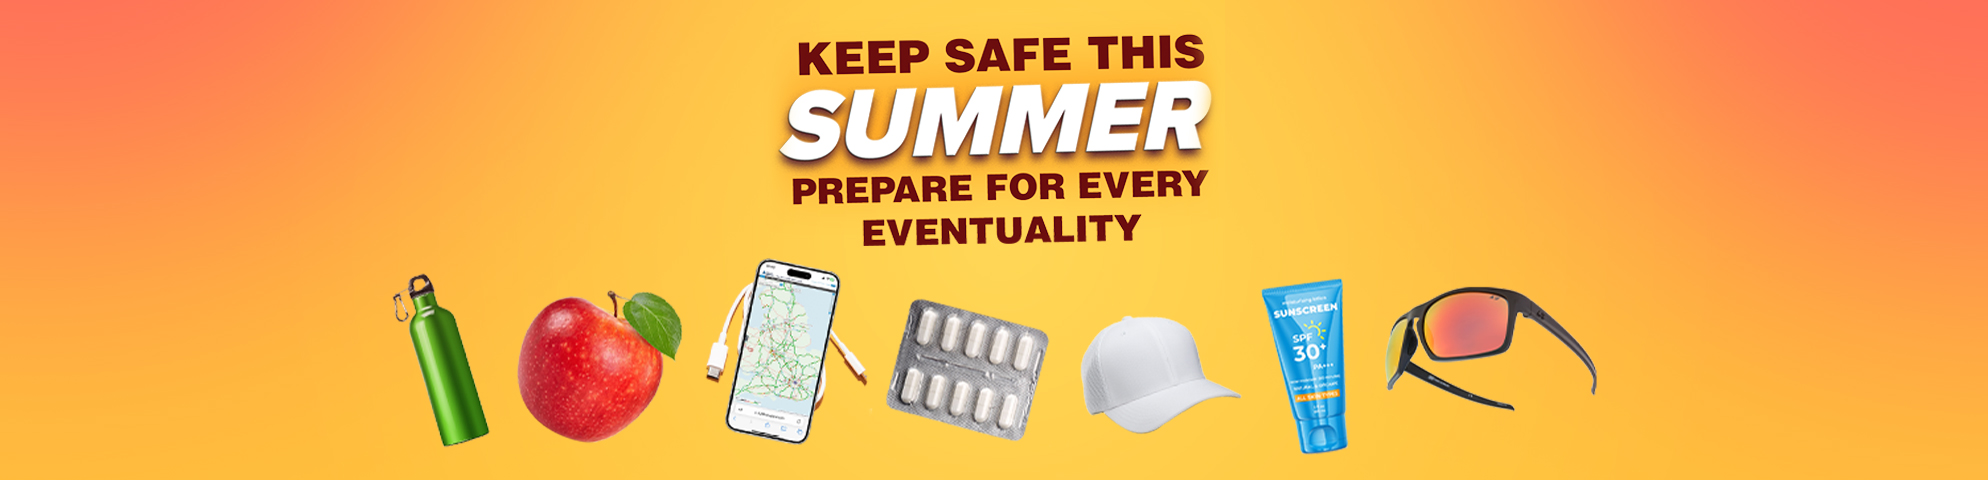 Keep safe this summer prepare for every eventuality